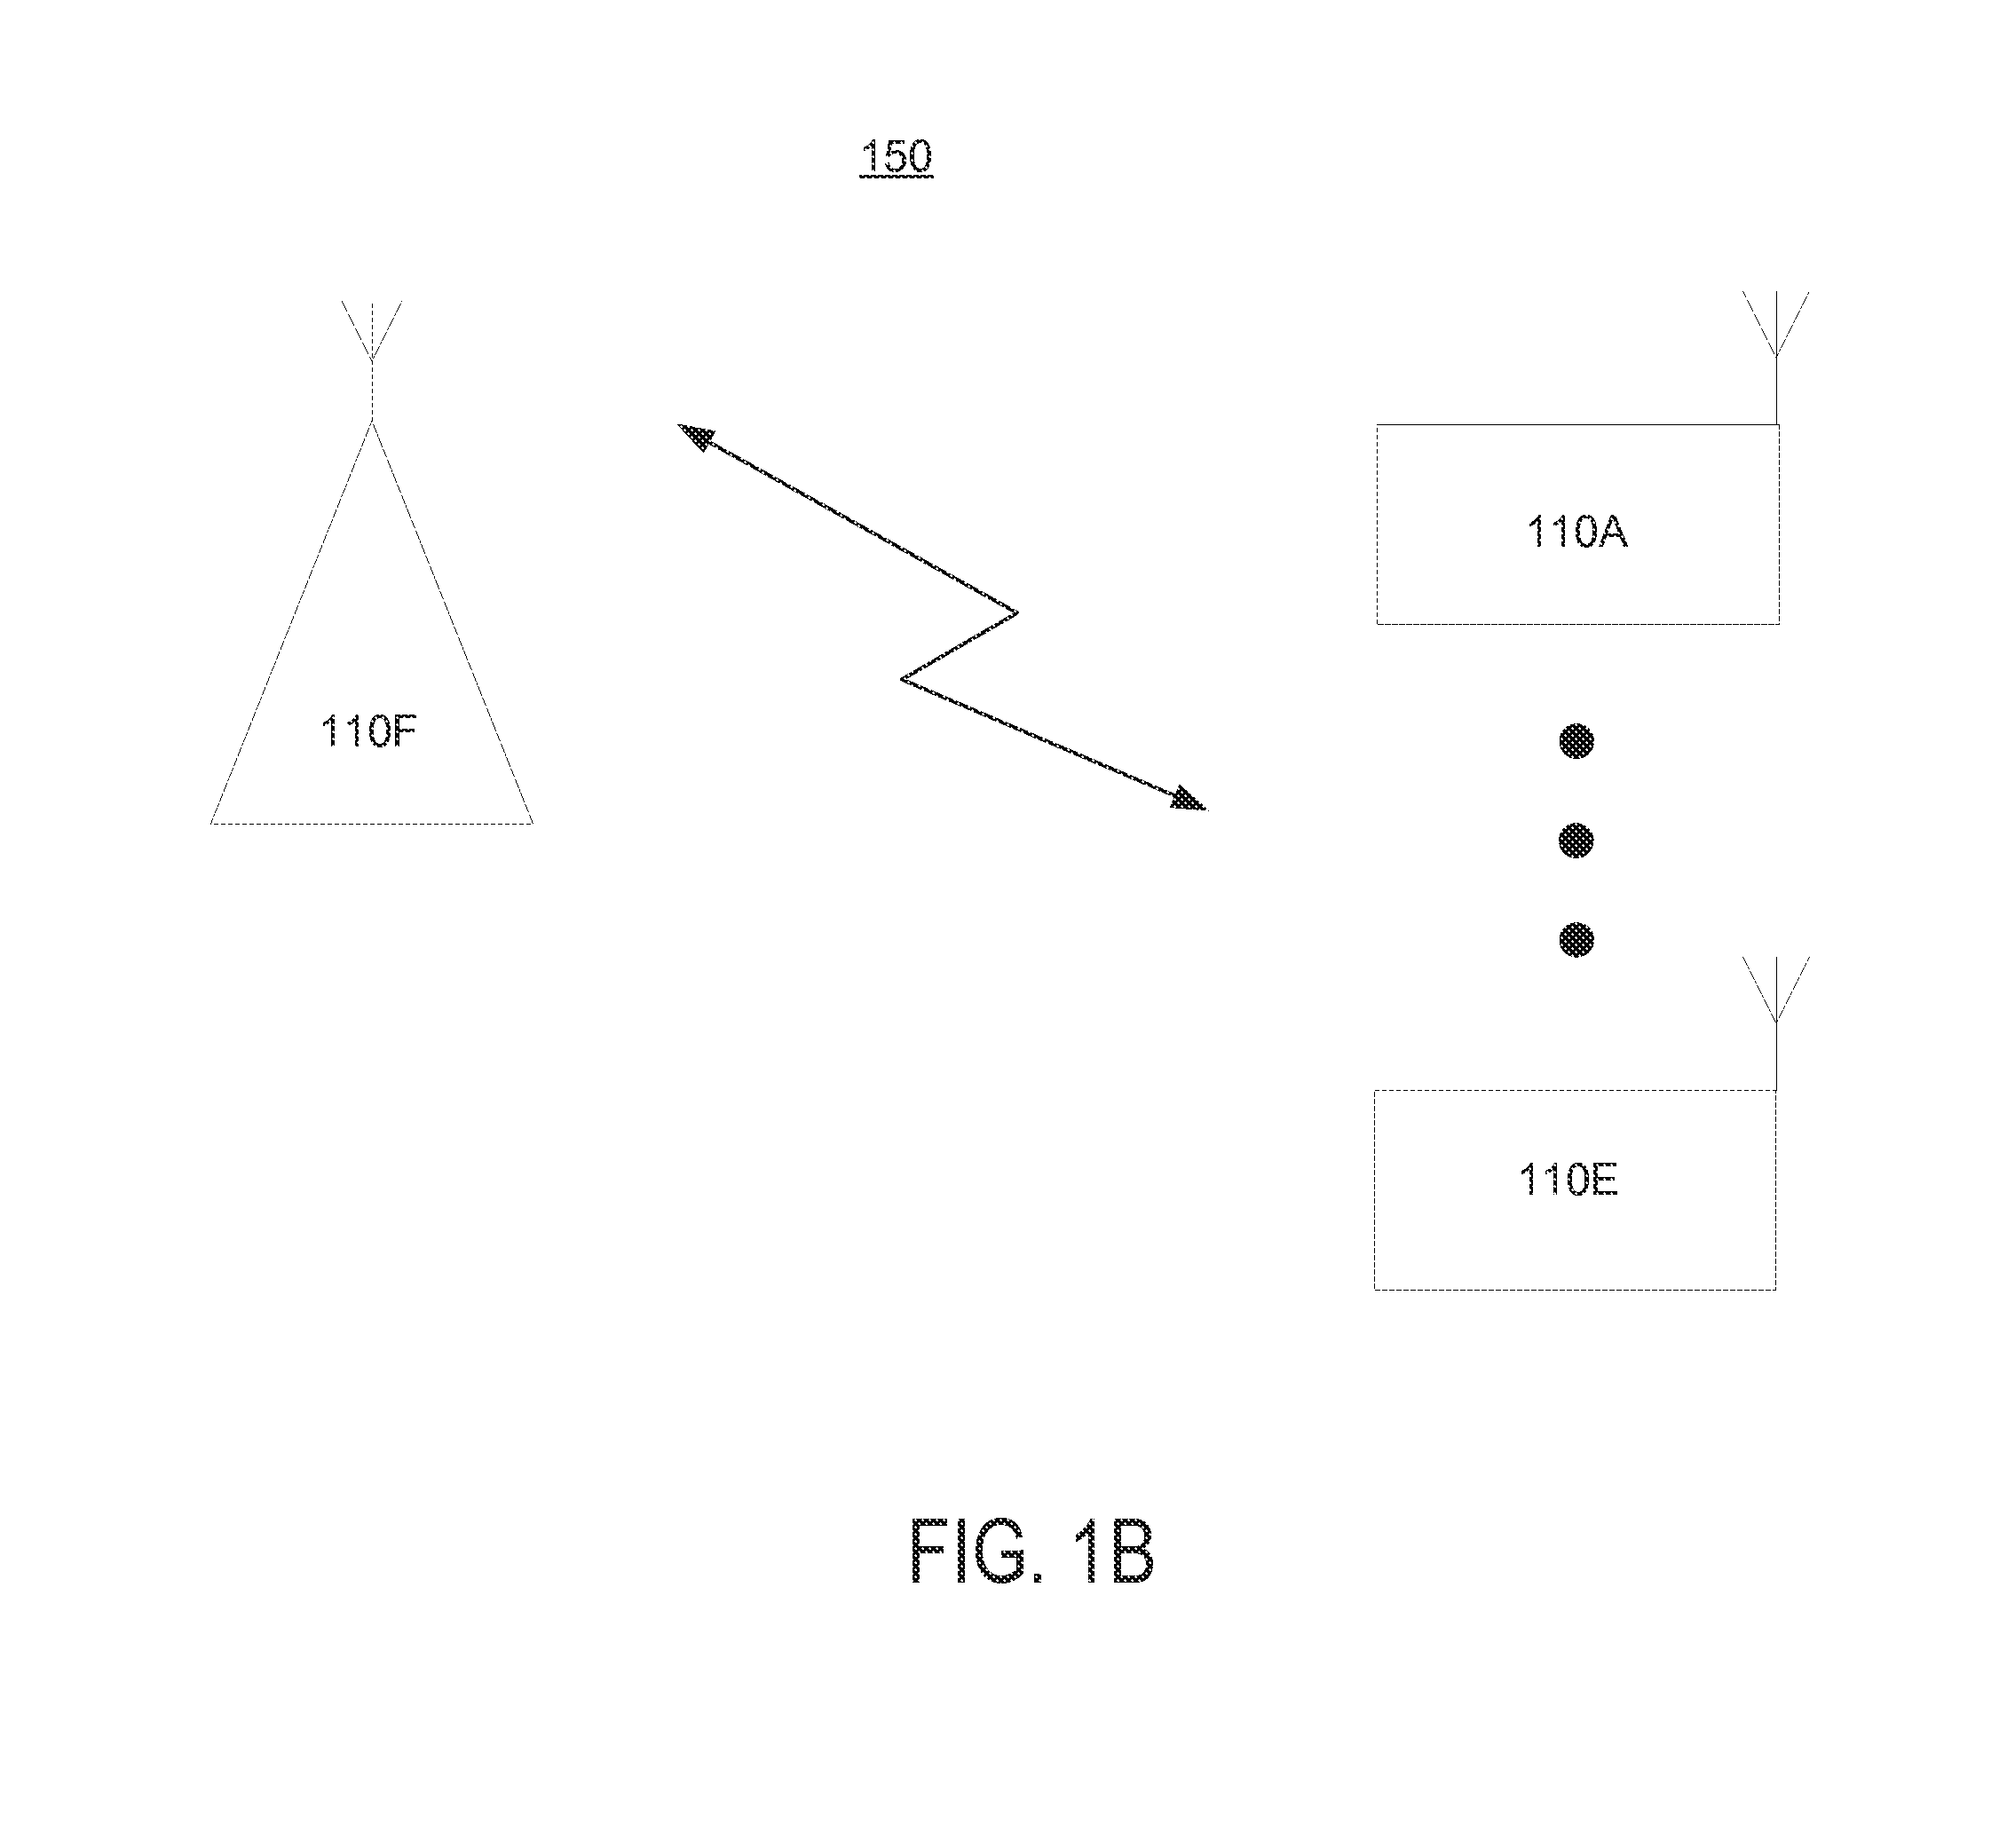 Communication protocol between access point and wireless station